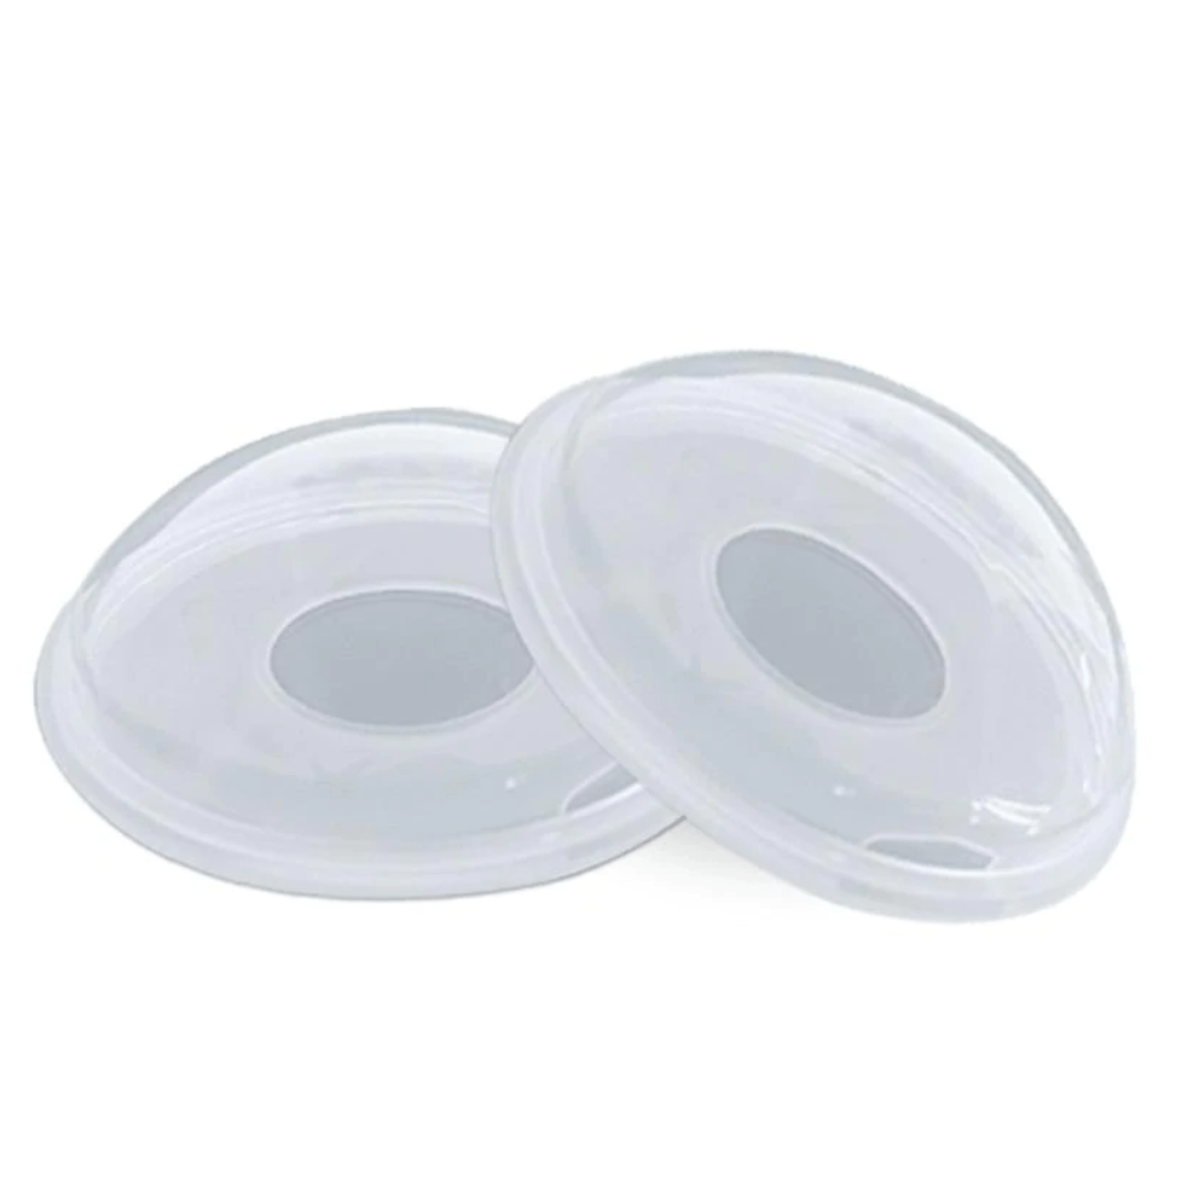 Breast Shells, Nursing Cups, Milk Saver, Protect Sore Nipples for  Breastfeeding, Collect Breastmilk Leaks for Nursing Moms, Soft and Flexible  Silicone Material, Reusable, 2-Pack : Baby 